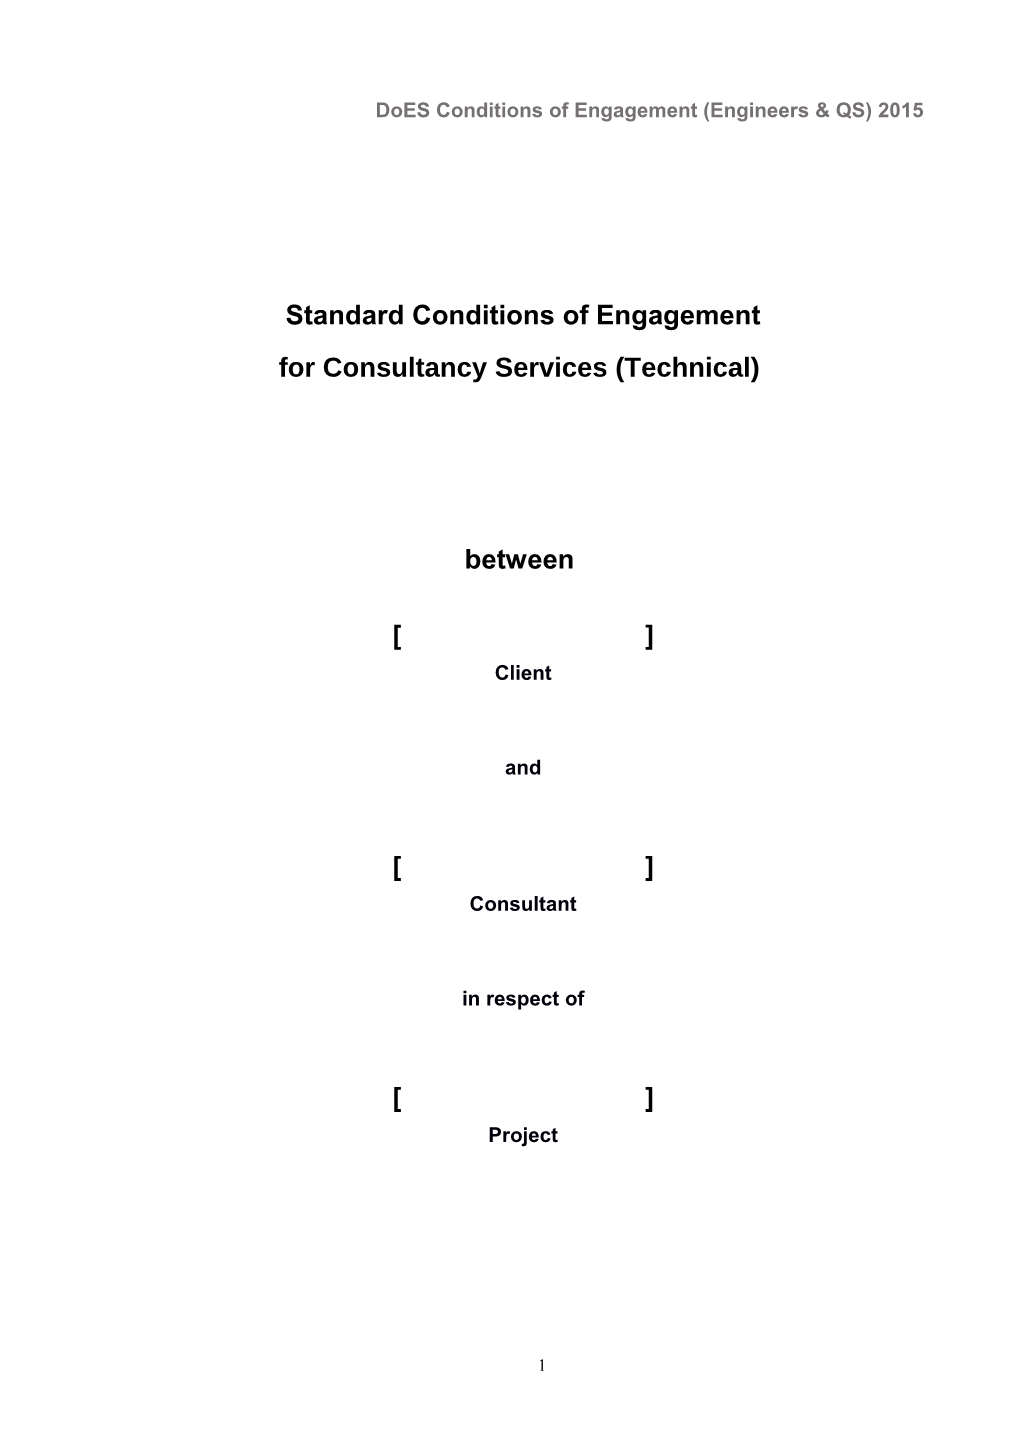 Does Conditions of Engagement (Engineers & QS) 2015